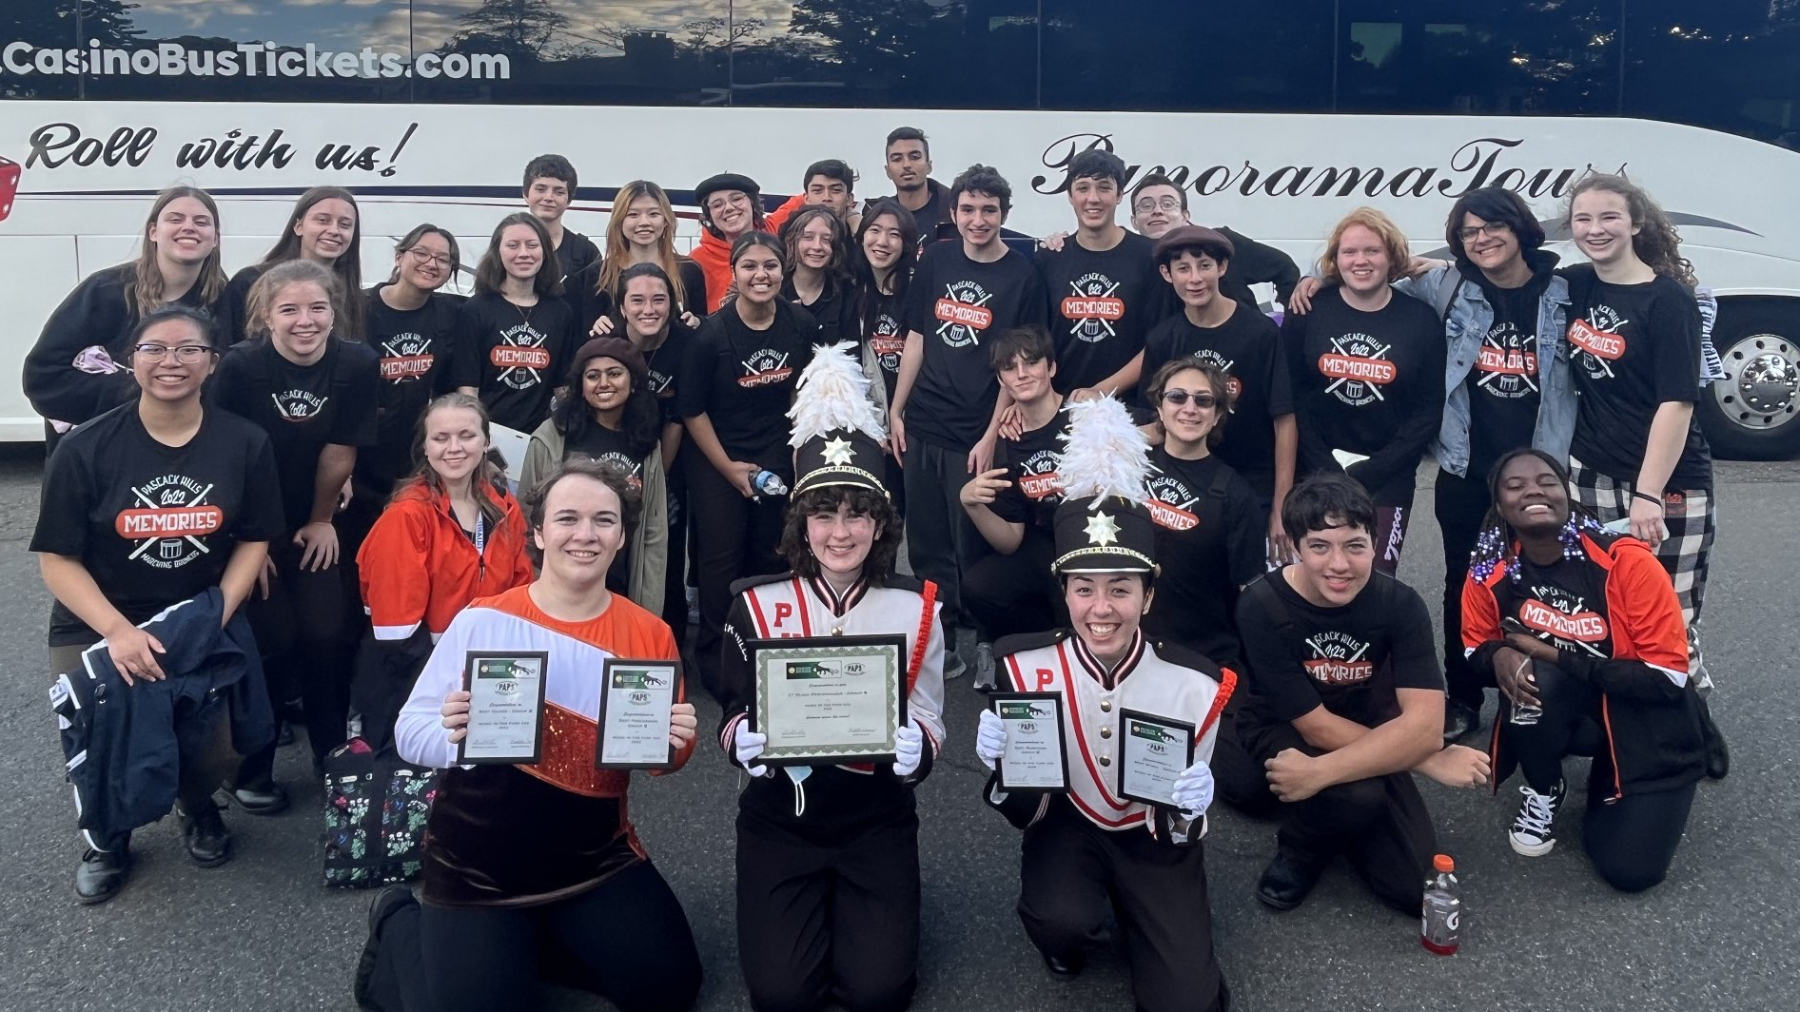 Westfield High School Marching Band Ends 2023 Season on a High Note